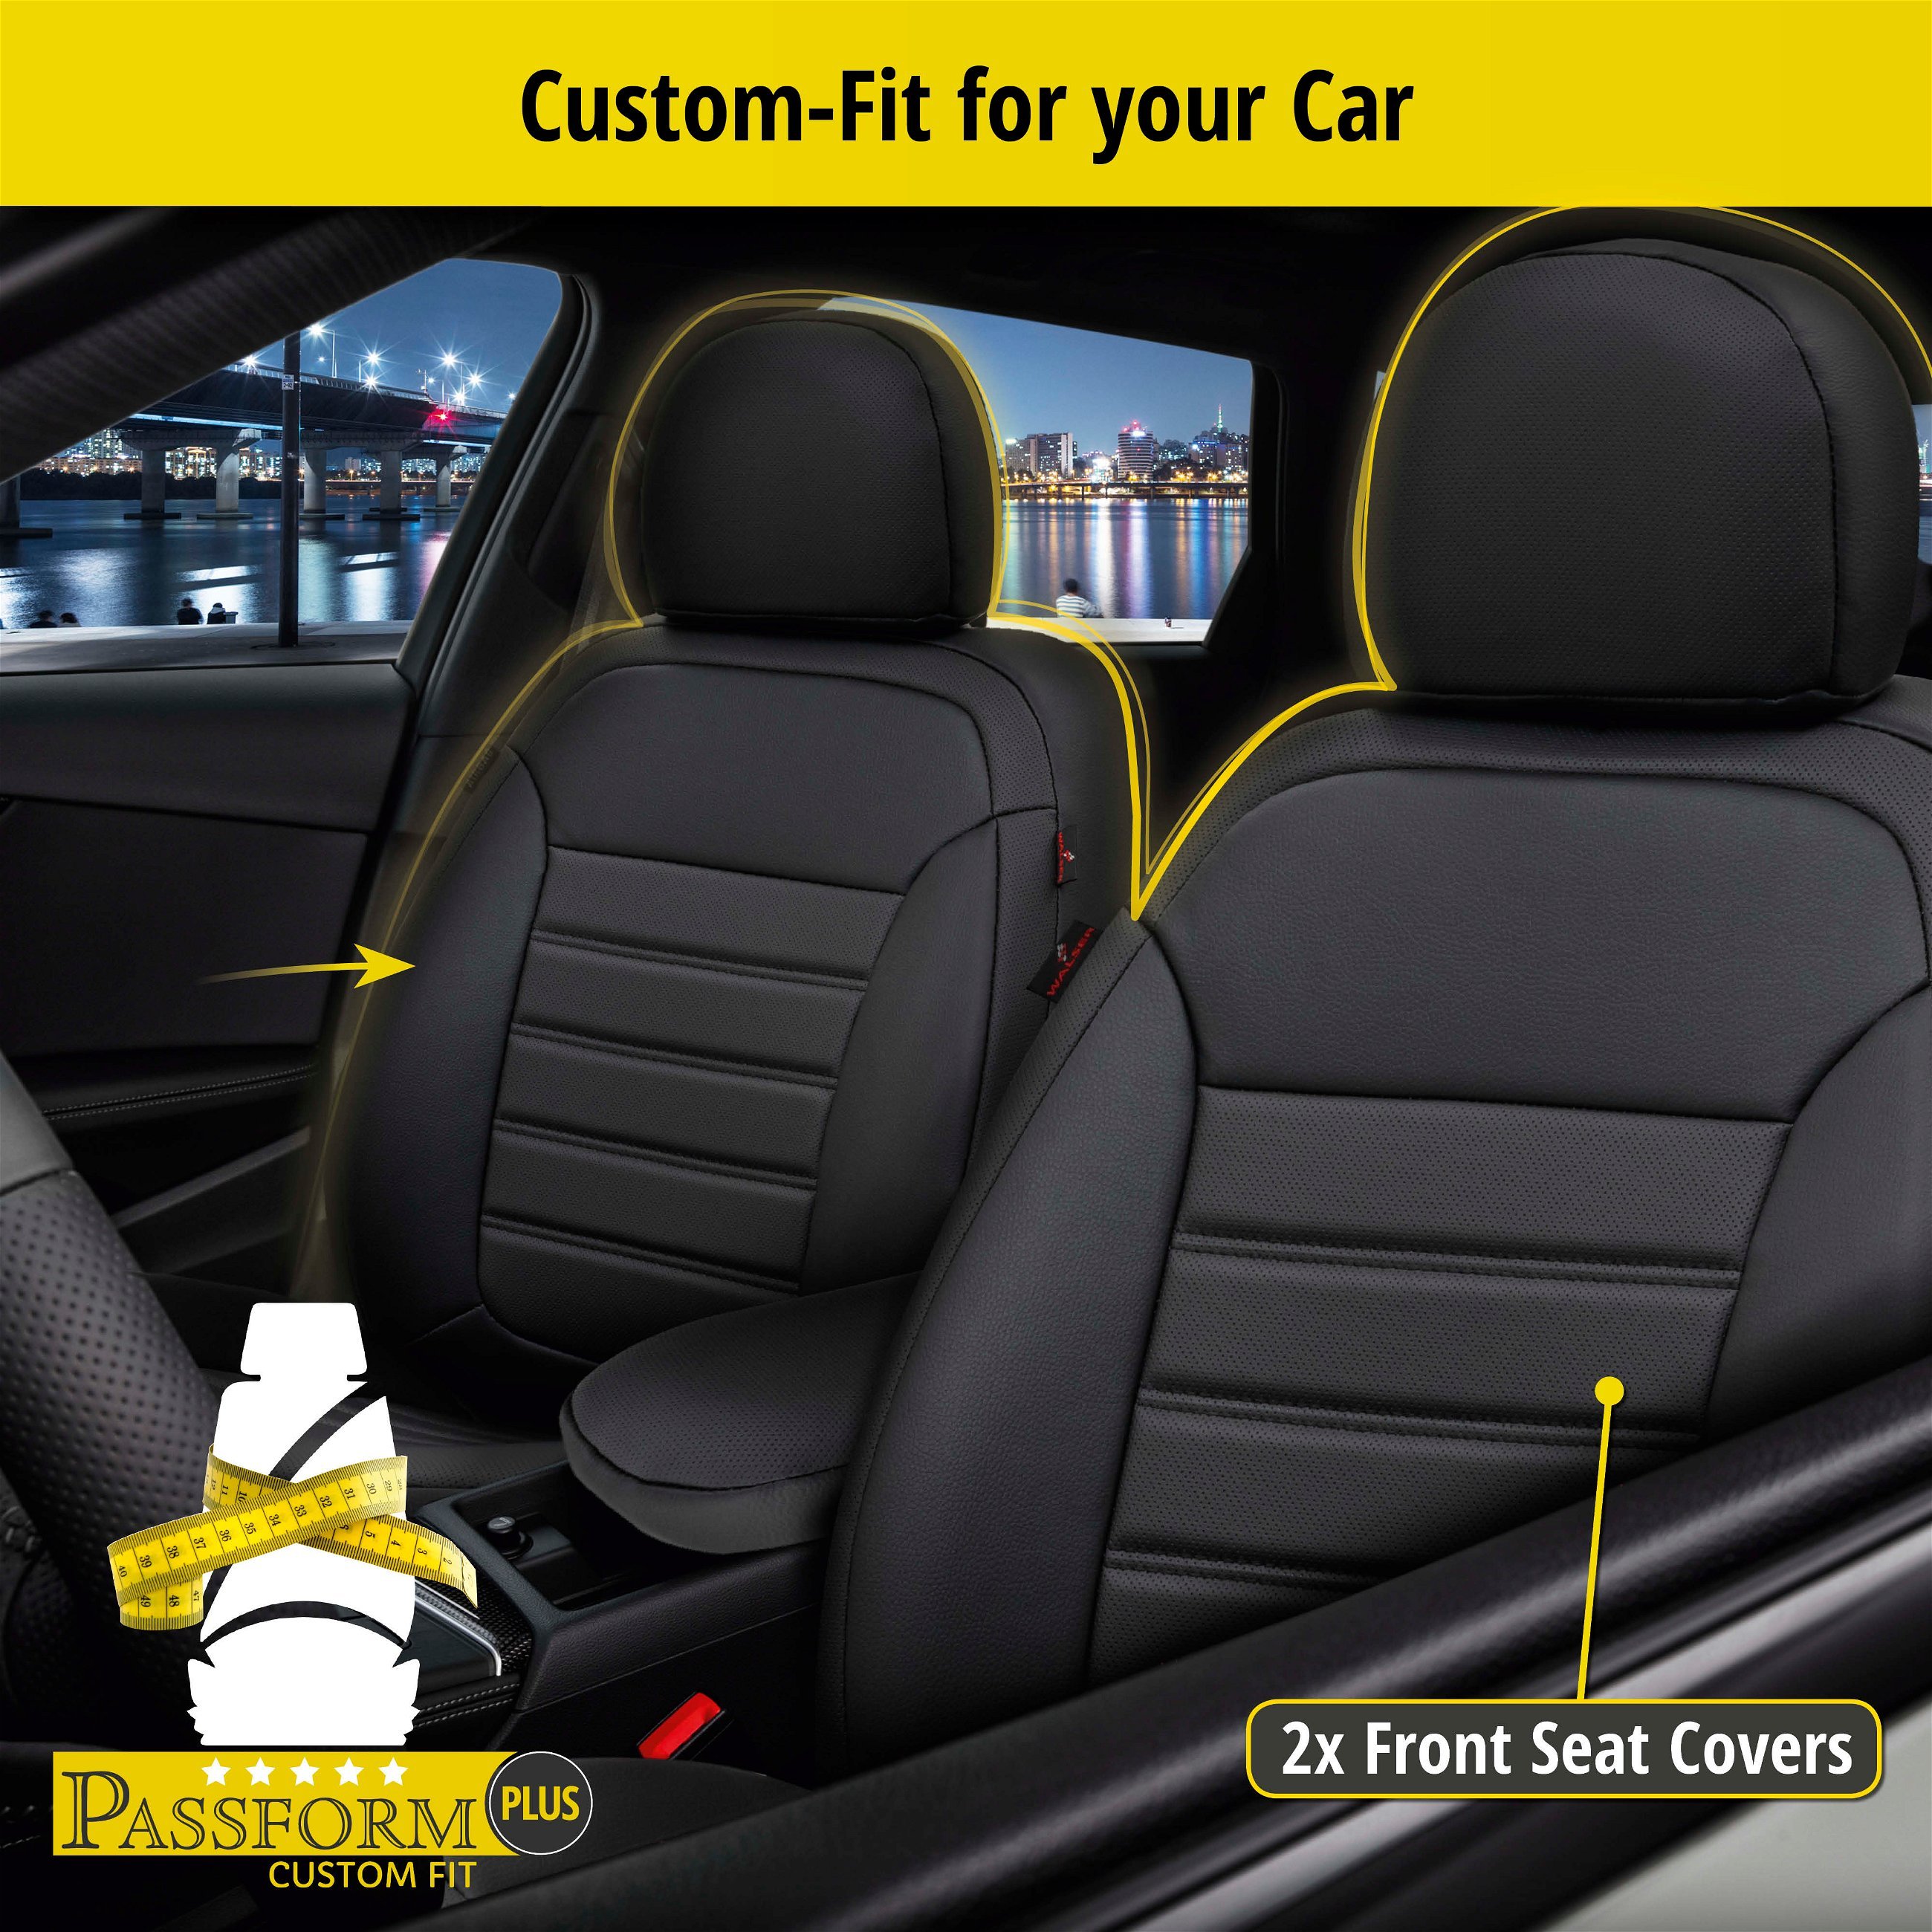 Seat Cover Robusto for Skoda Roomster (5J) 03/2006-05/2015, 2 seat covers for normal seats